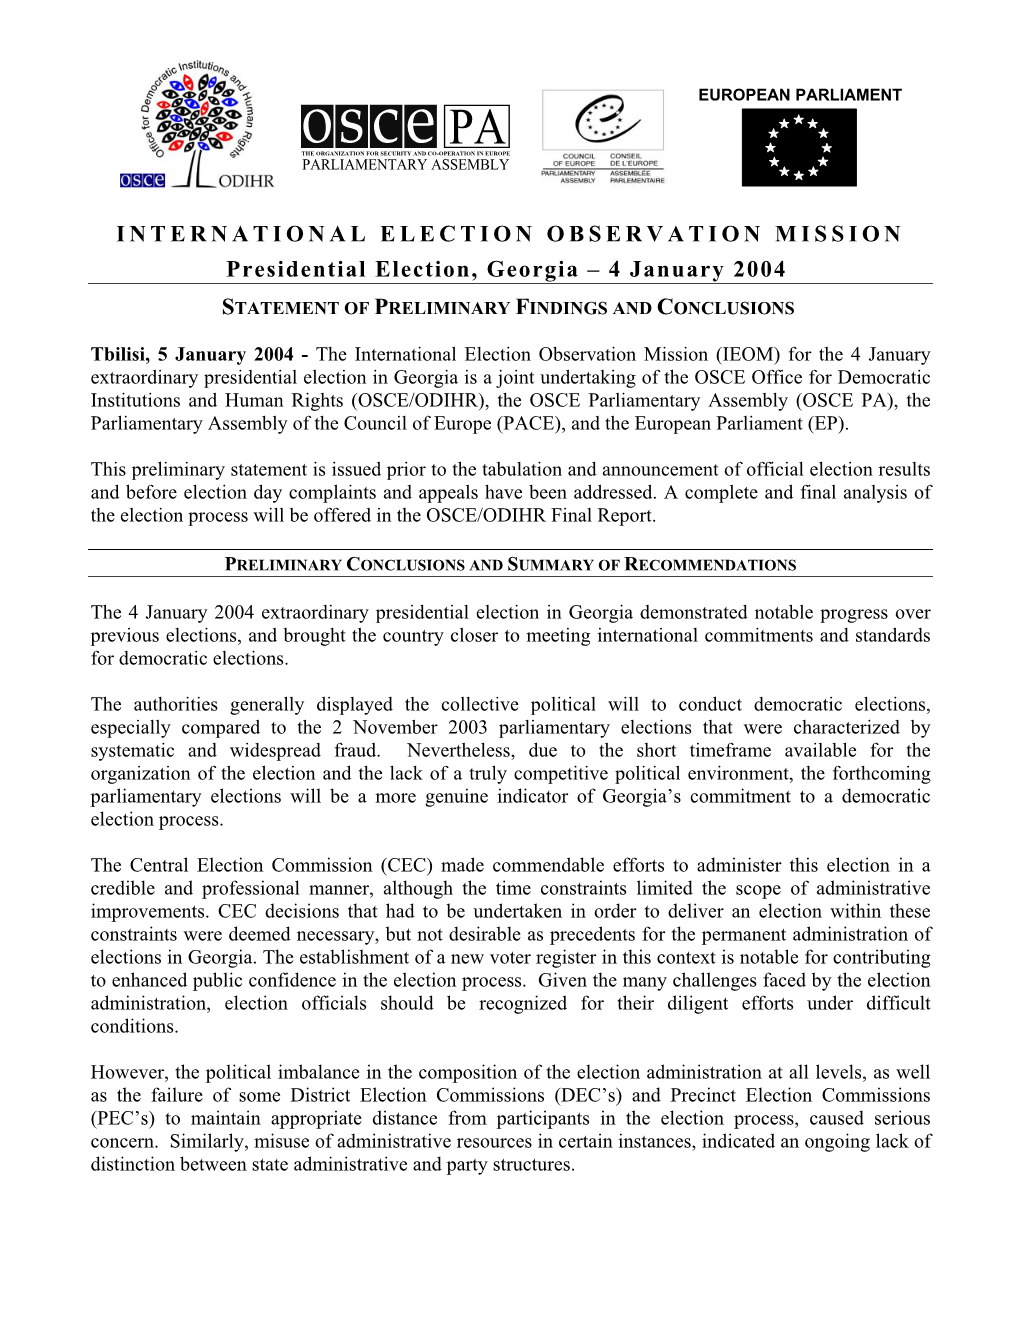 INTERNATIONAL ELECTION OBSERVATION MISSION Presidential Election, Georgia – 4 January 2004 STATEMENT of PRELIMINARY FINDINGS and CONCLUSIONS